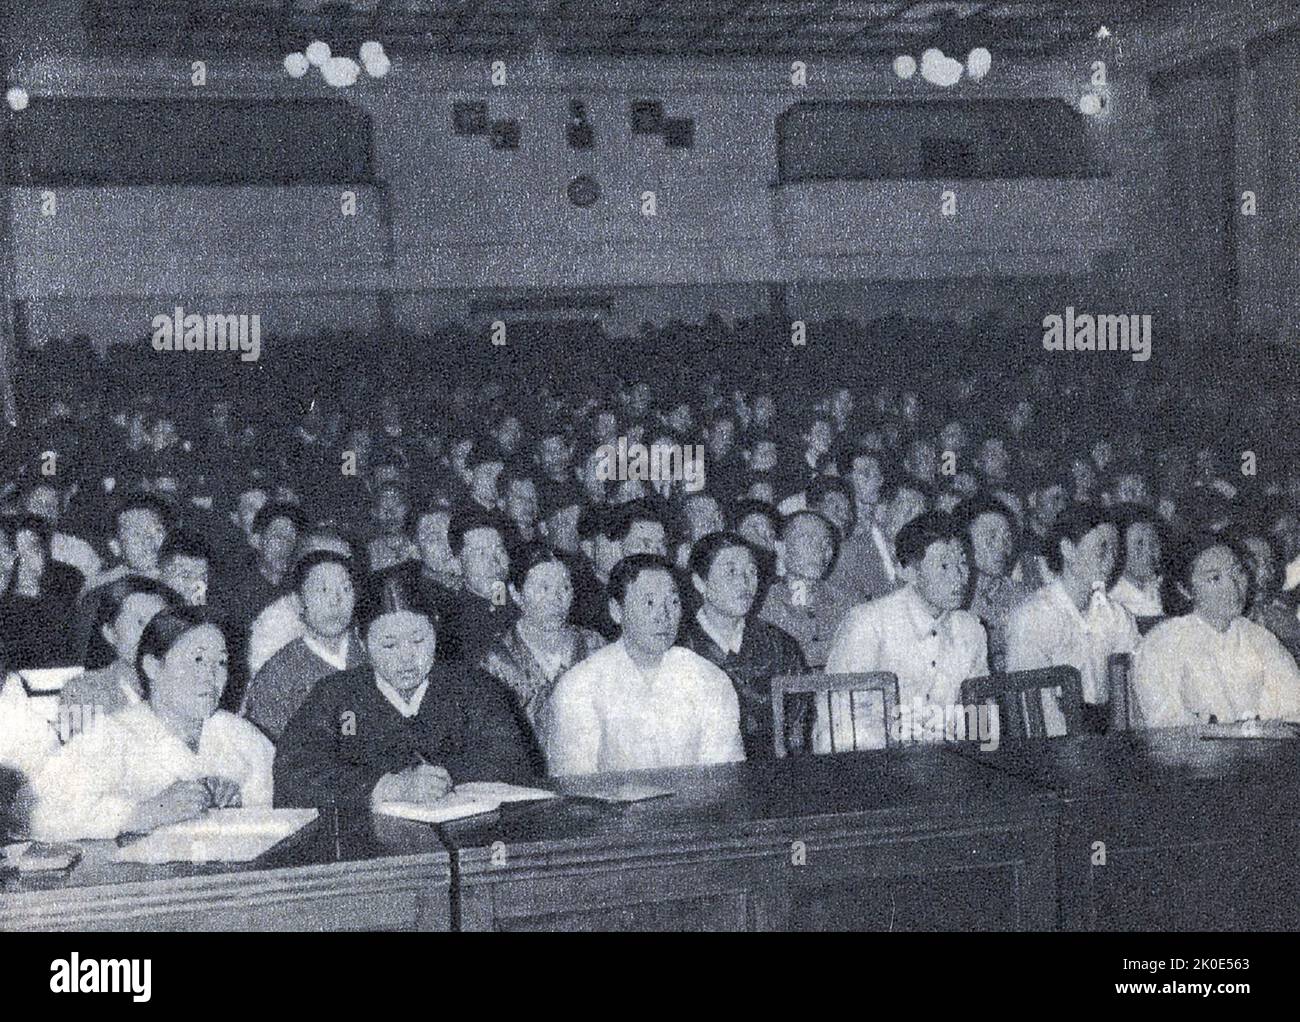 Propaganda photograph of communist party members in North Korea listening to a speech by leader Kim Il-sung as he first introduced the term Chollima in December 1956, shortly before the start of the 1957-61 five-year plan. Stock Photo